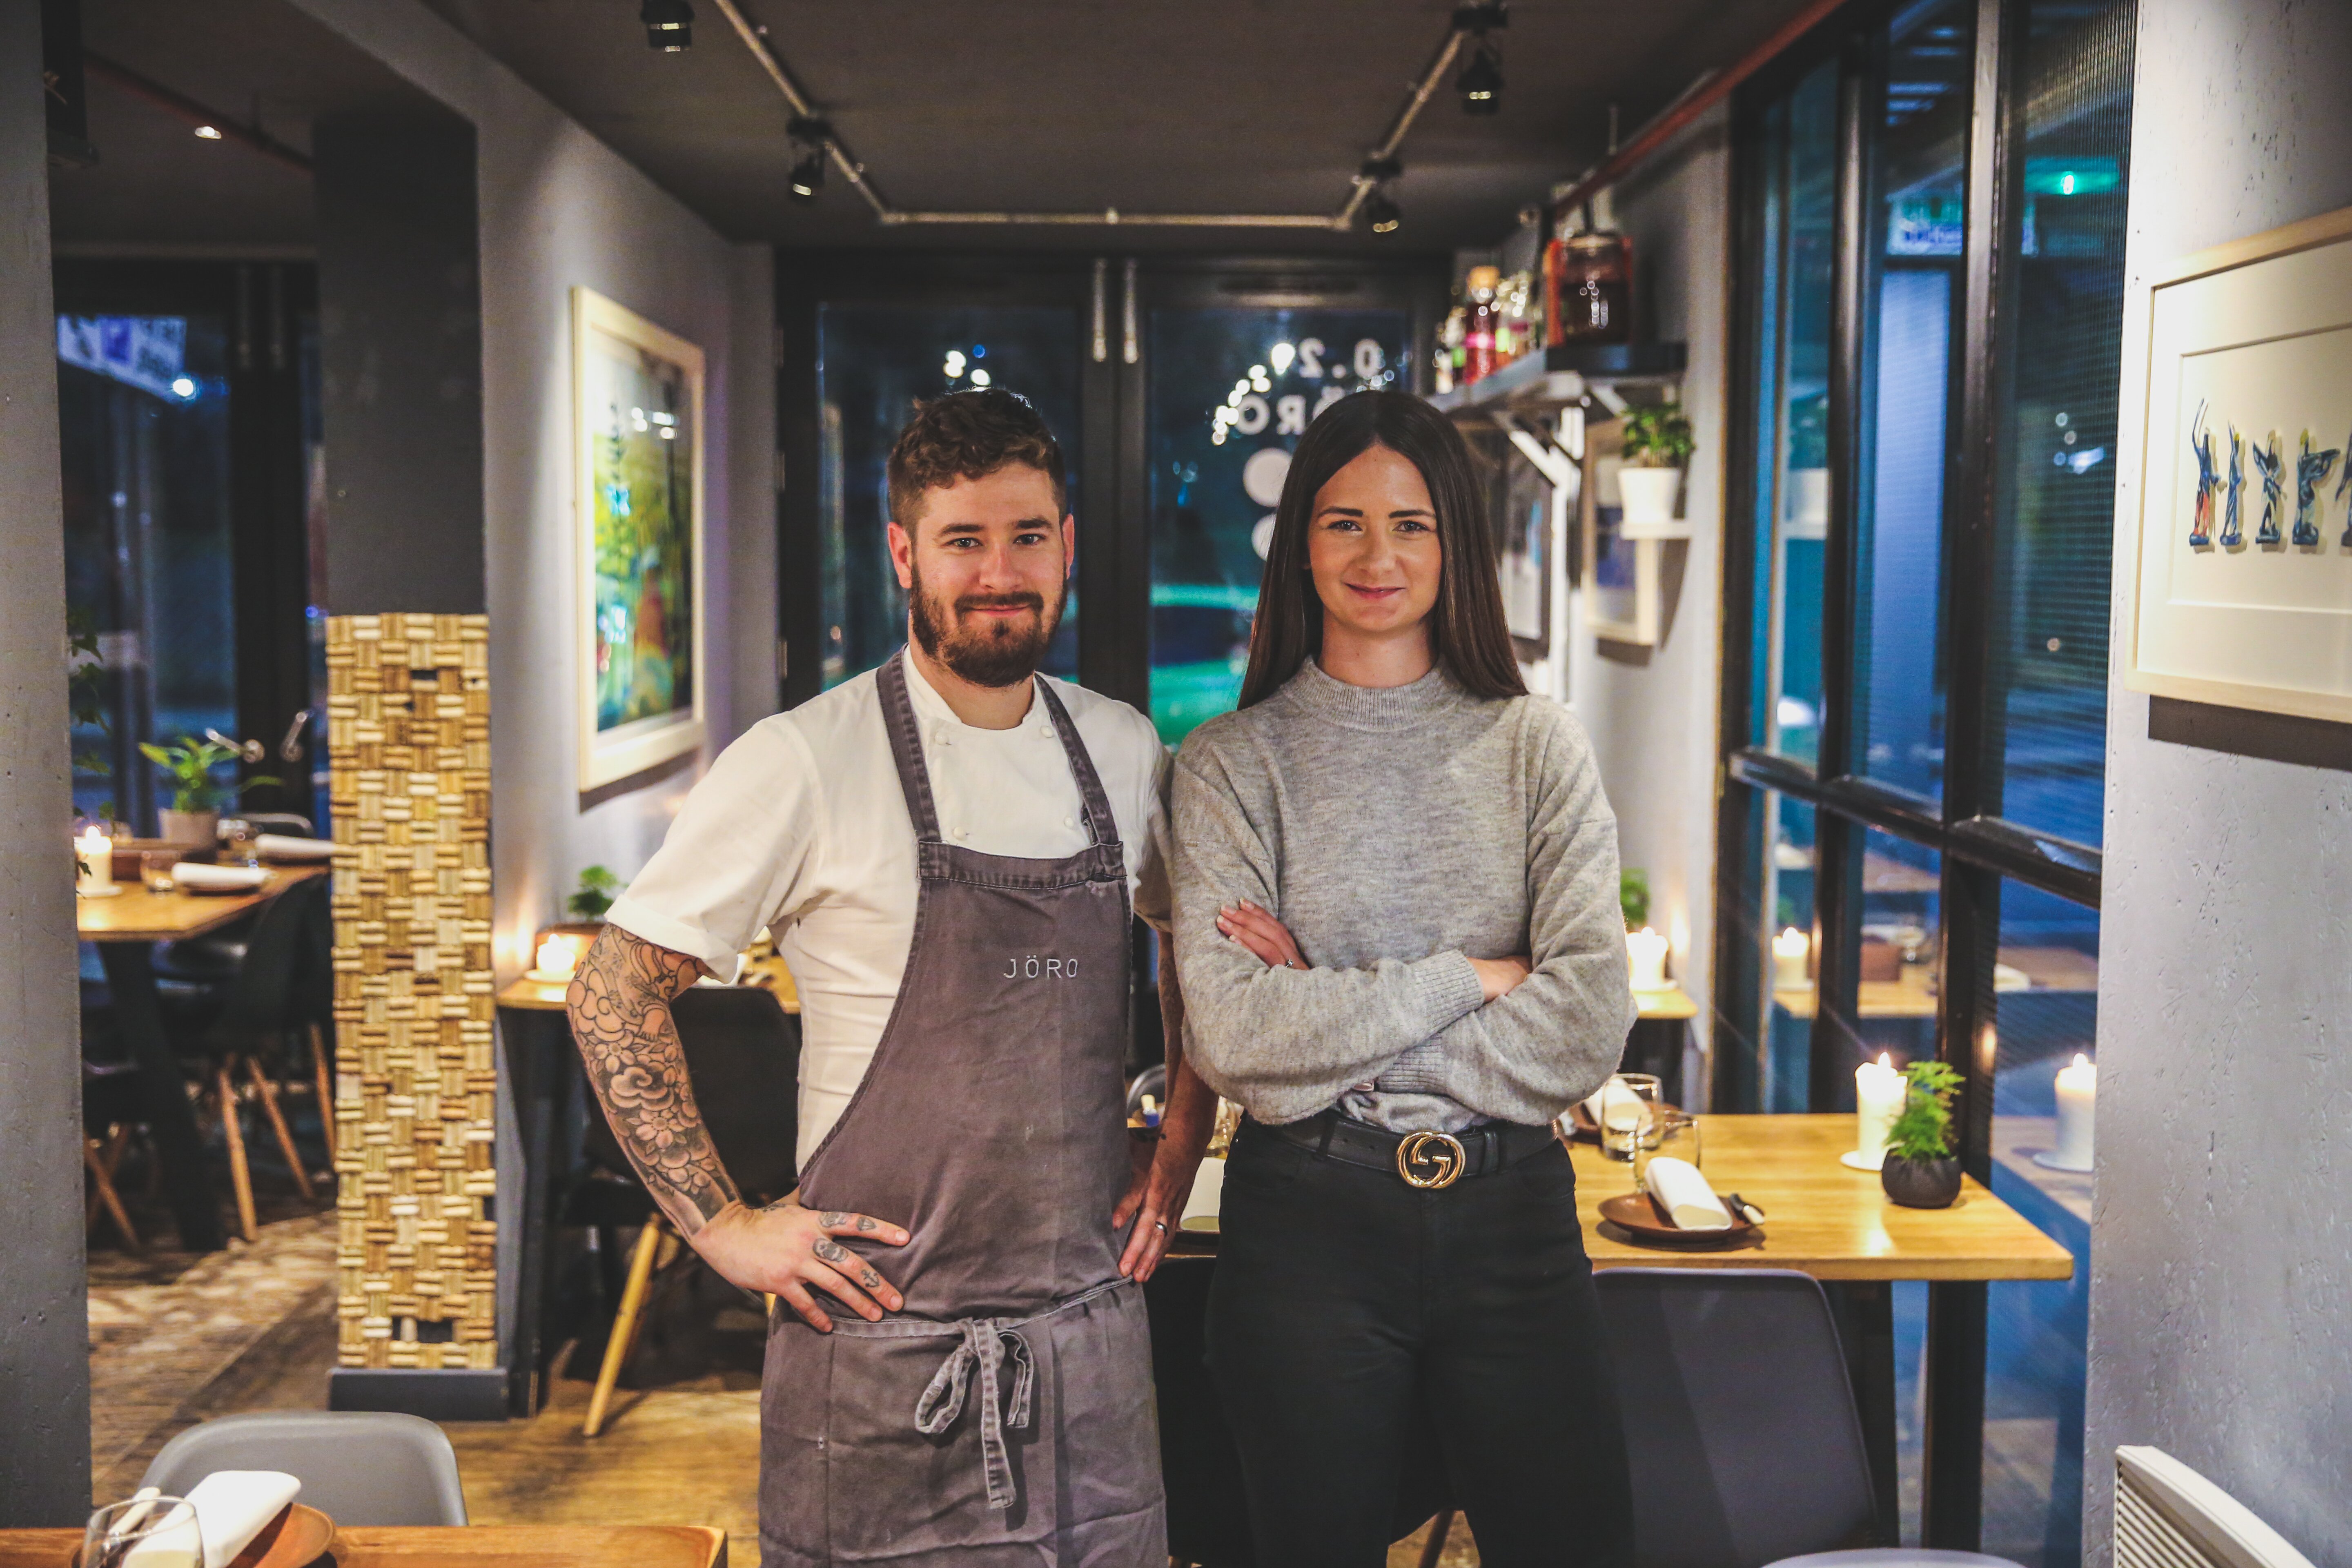 Luke French and Stacey Sherwood-French to relocate Jöro